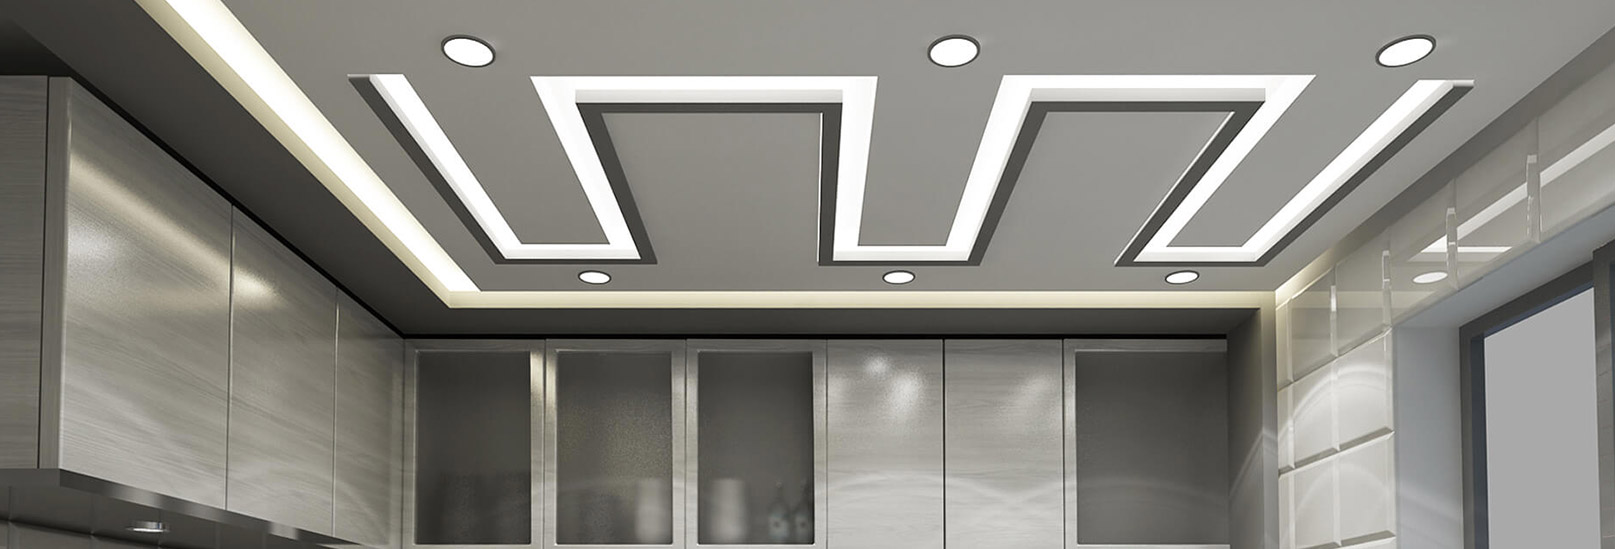 Simple and Best False Ceiling Designs for Living Room | Saint ...